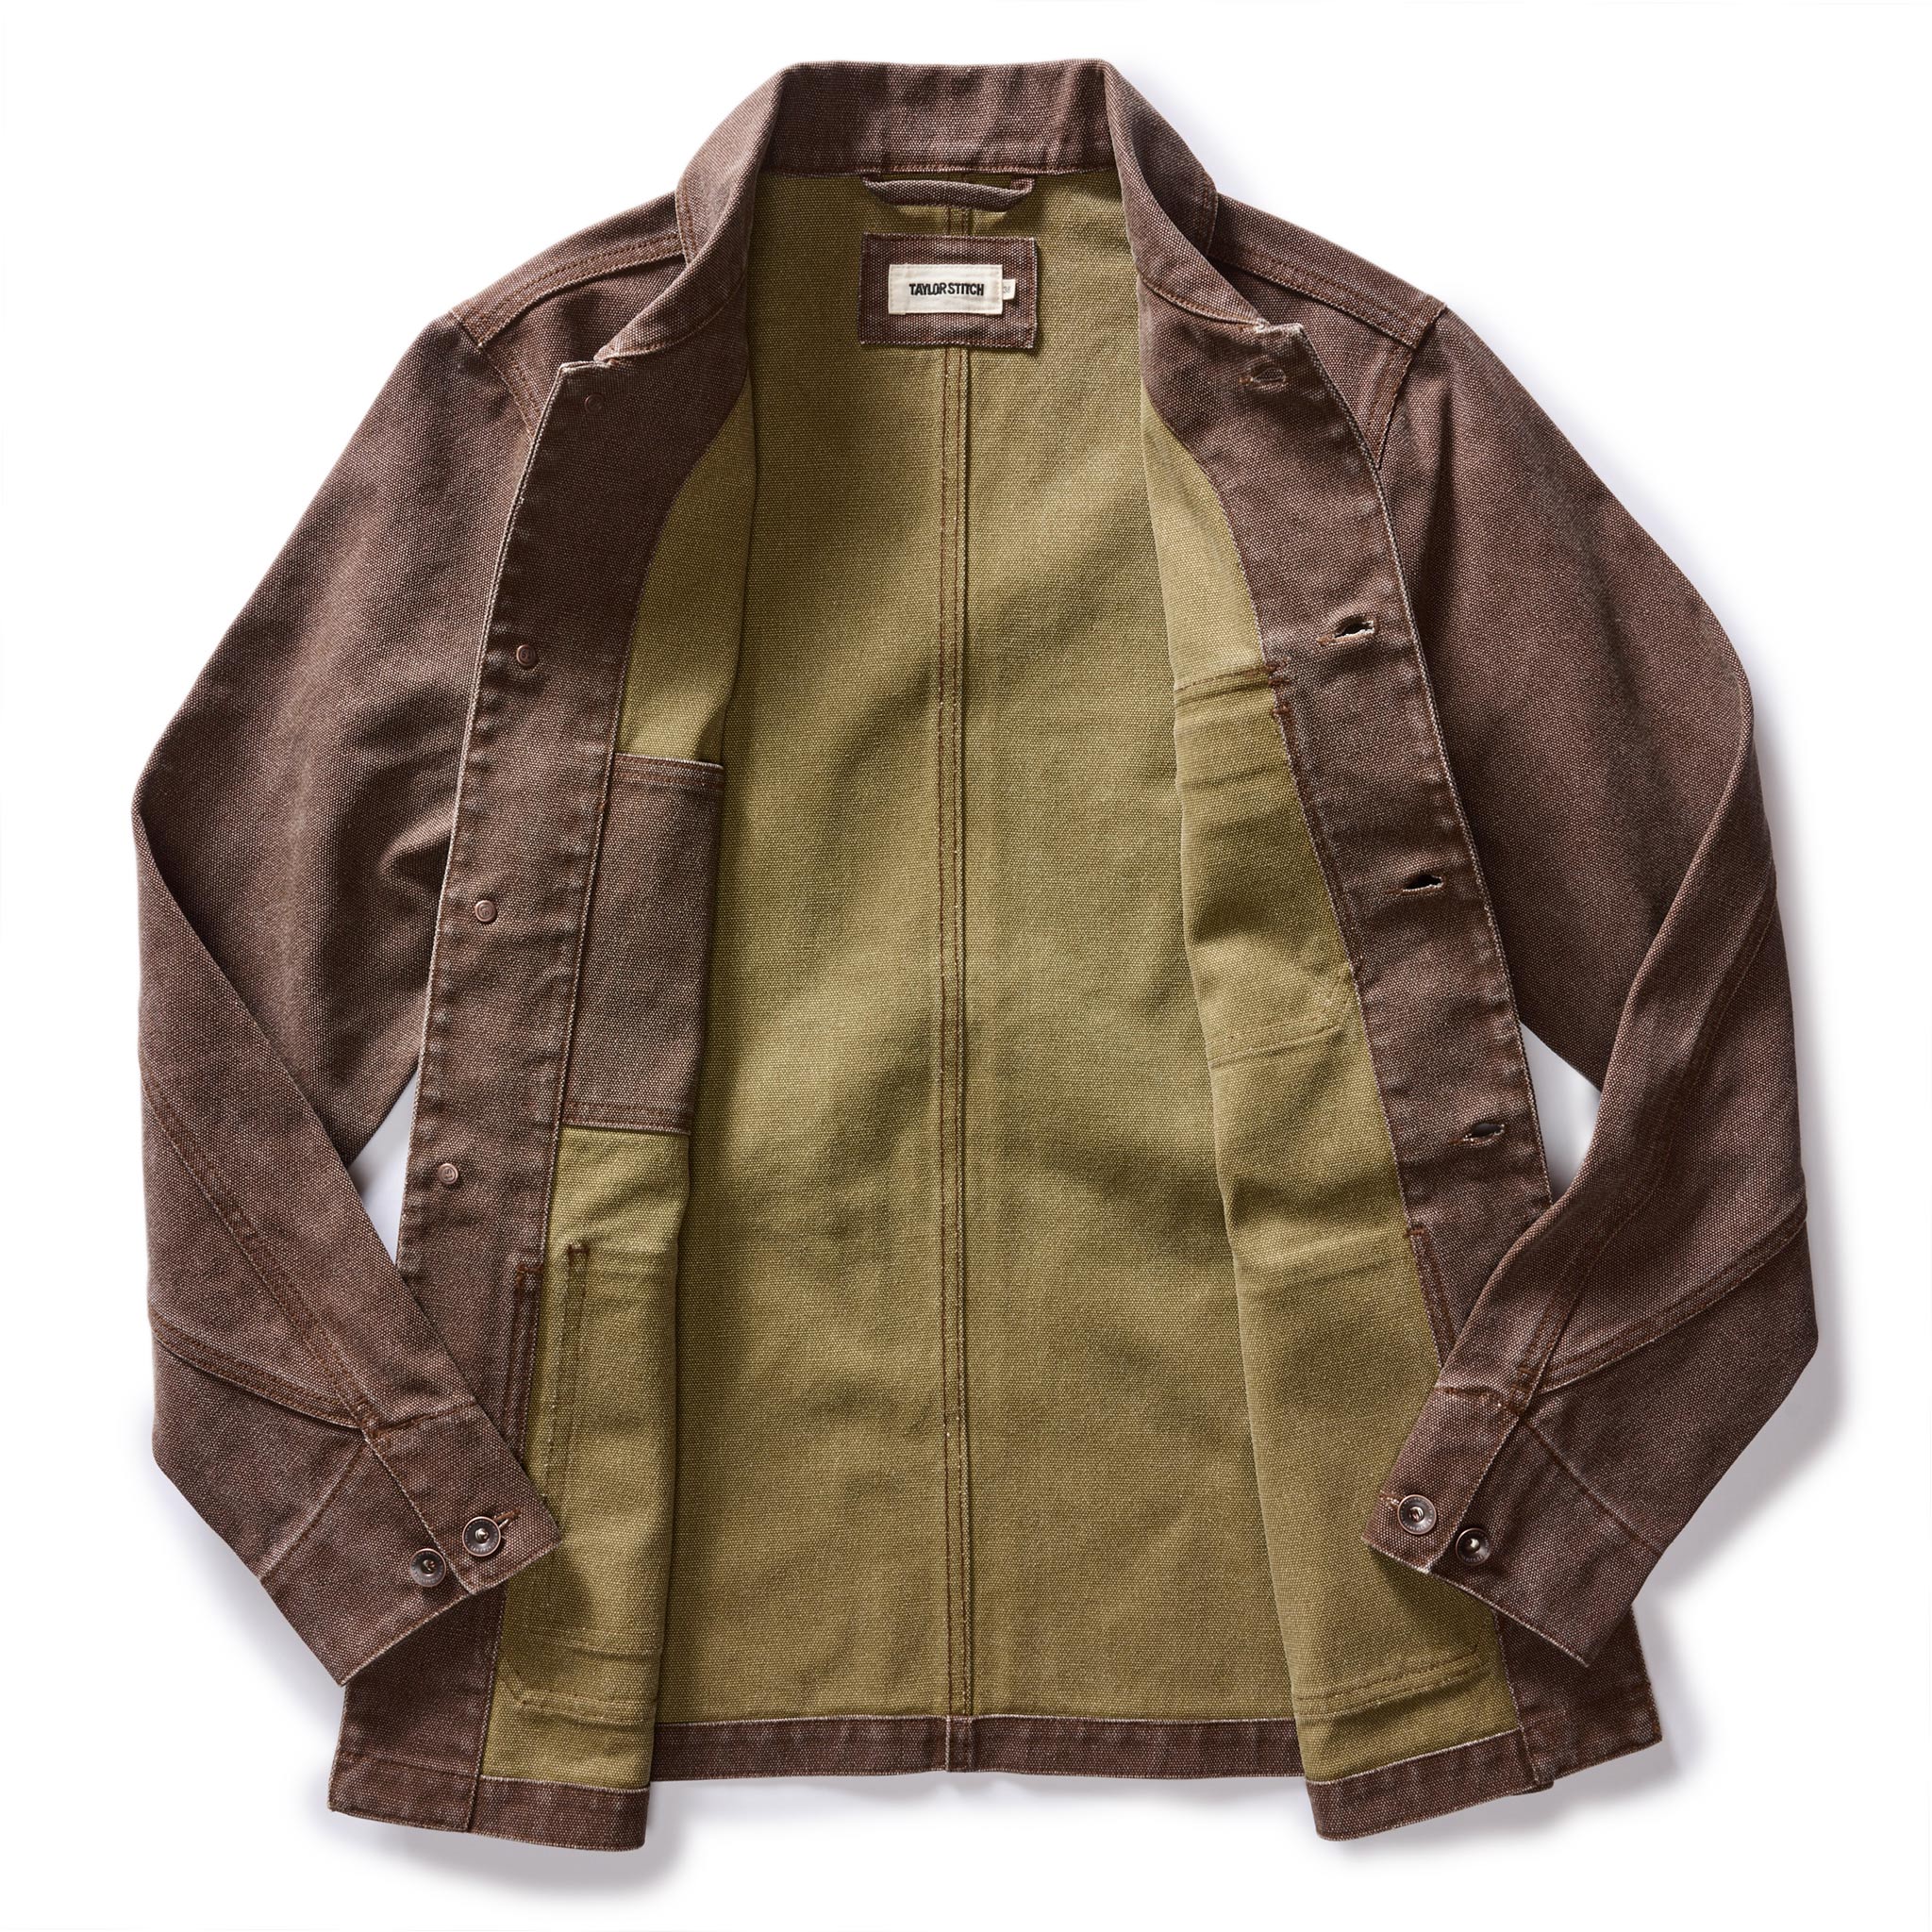 The Fremont Jacket in Aged Penny Chipped Canvas